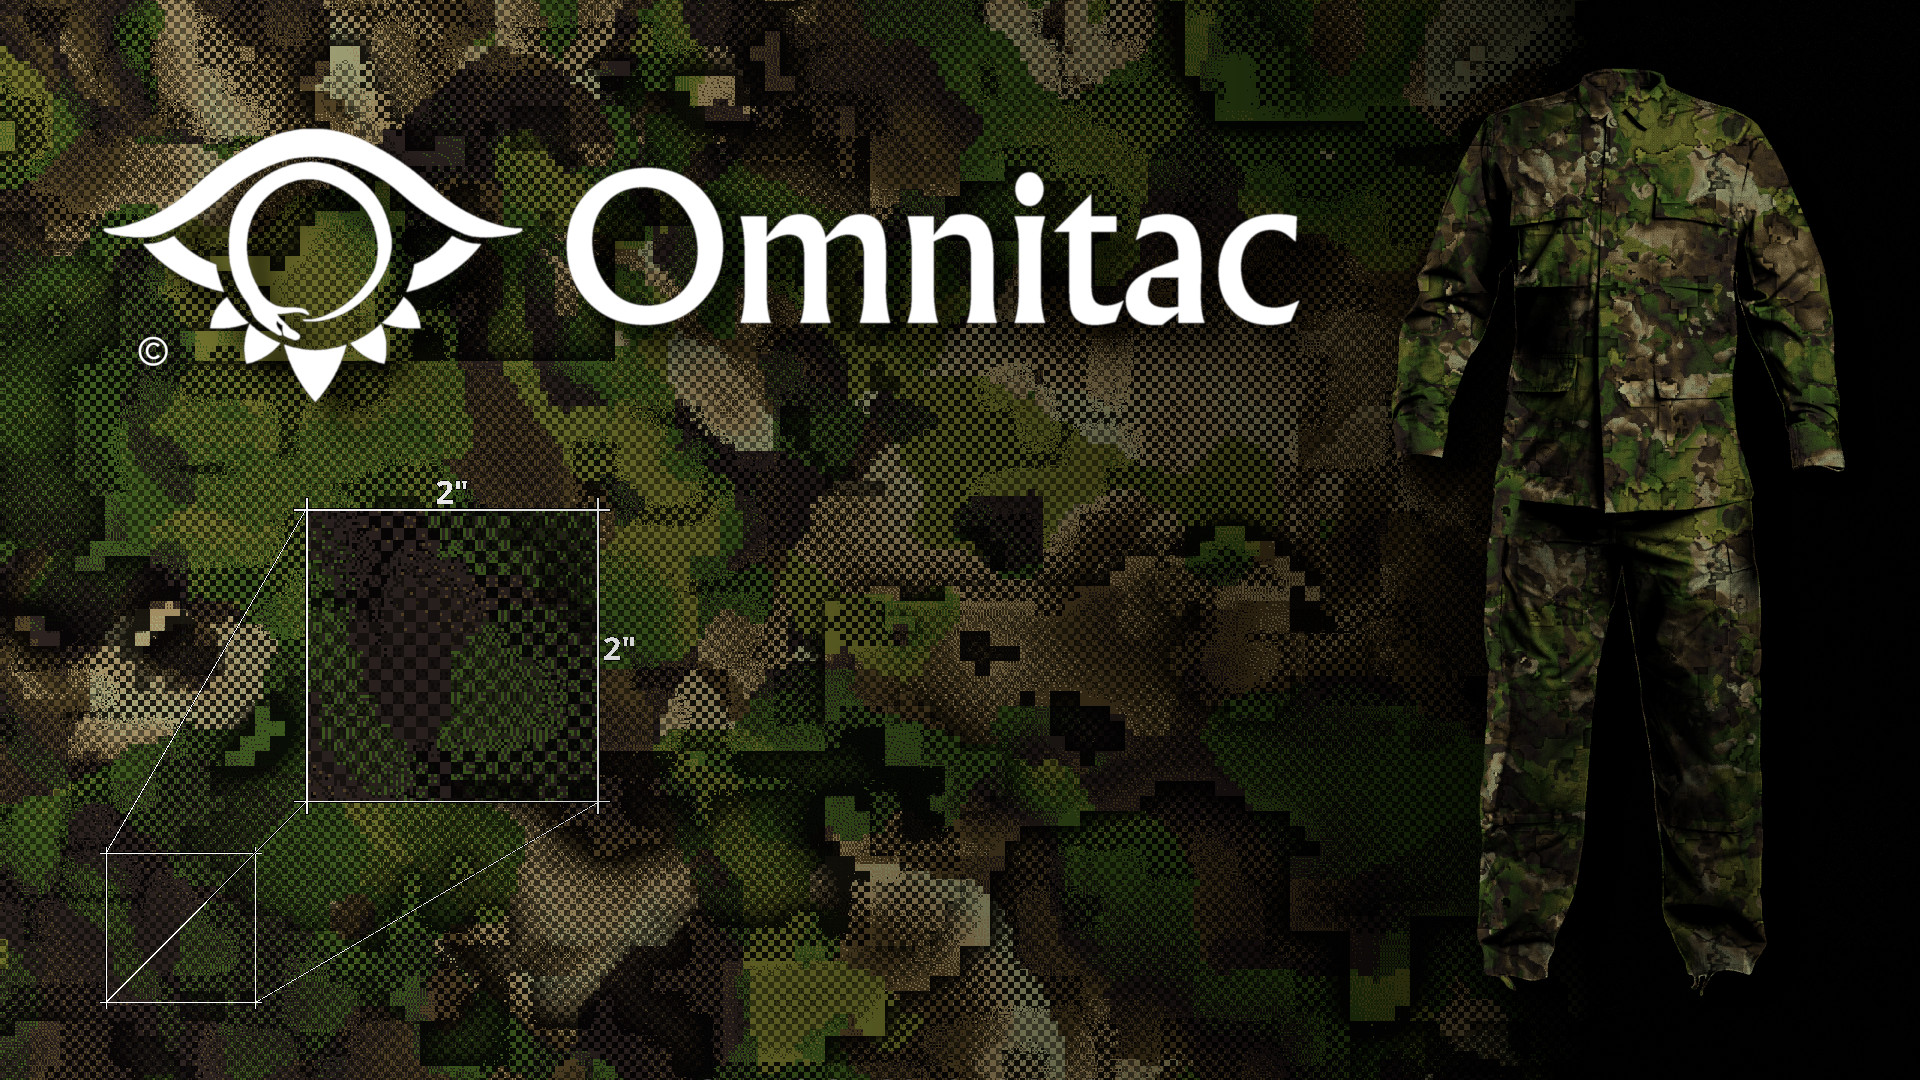 Woodland colored Omnicam camouflage overlaid with the Omnitac logo. Tactical and military inspired.